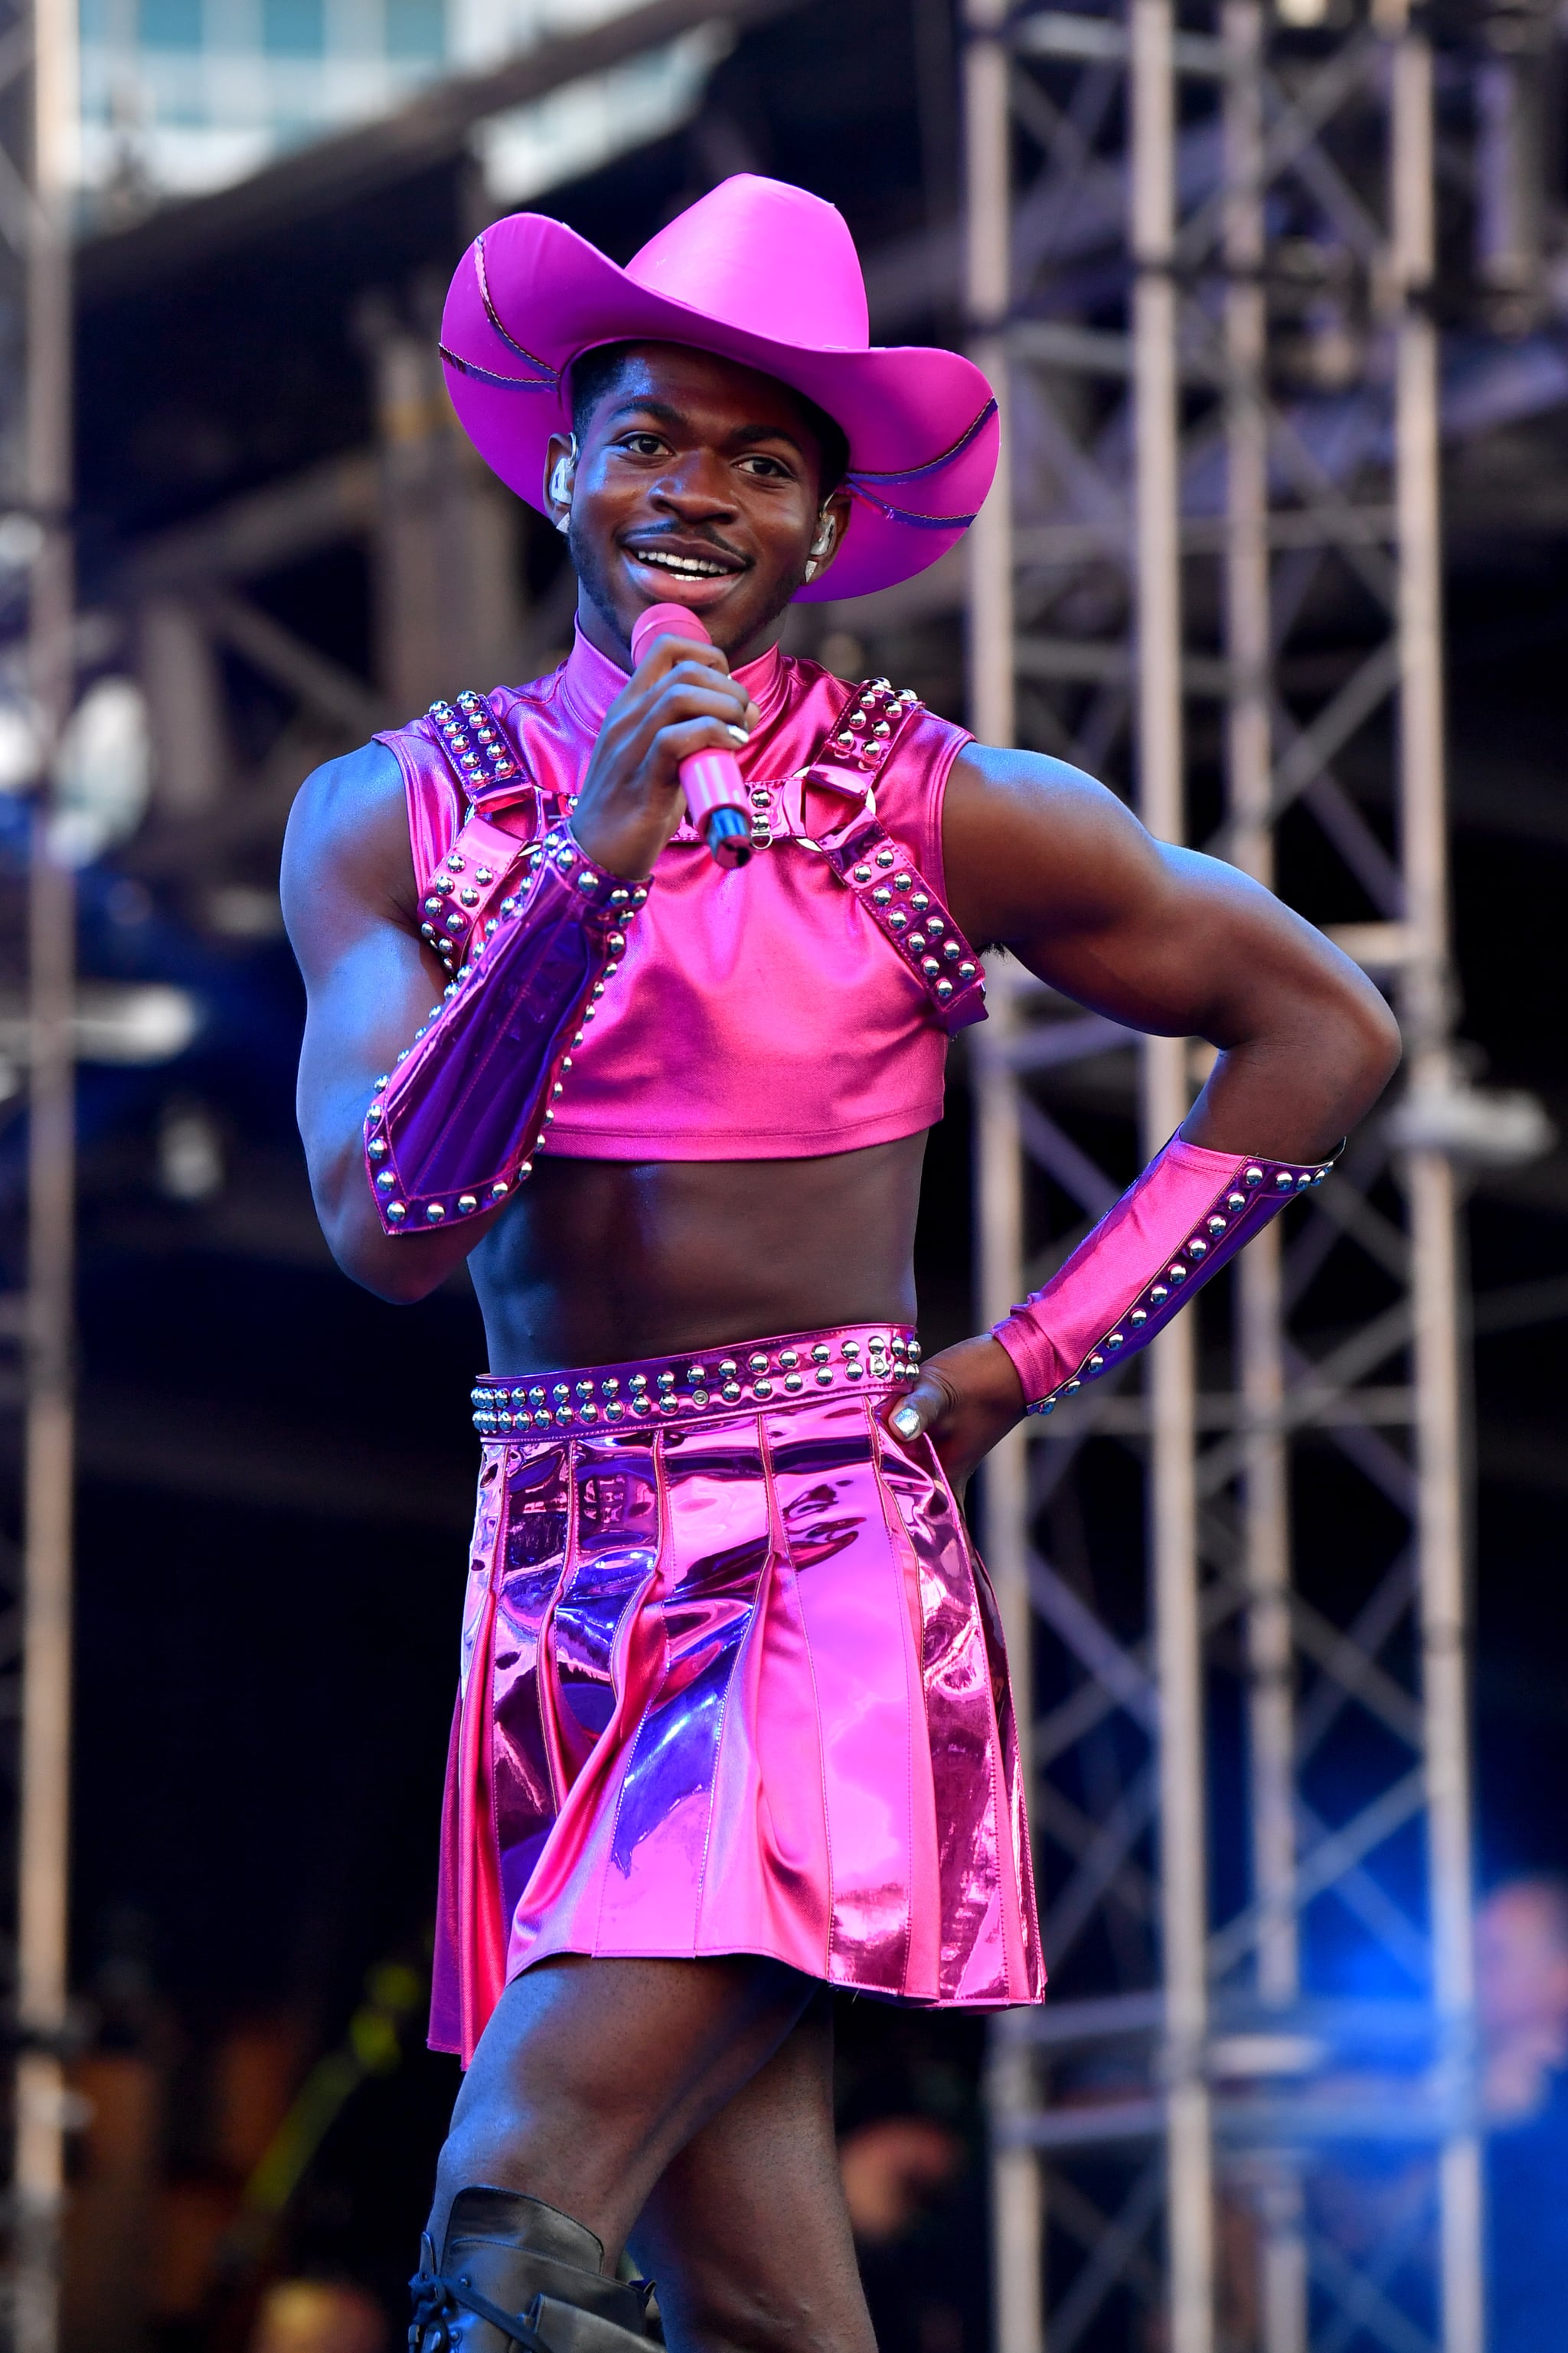 FORT LAUDERDALE, FLORIDA - DECEMBER 05: Lil Nas X performs on stage during Audacy Beach Festival at Fort Lauderdale Beach Park on December 05, 2021 in Fort Lauderdale, Florida. (Photo by Jason Koerner/Getty Images for Audacy)